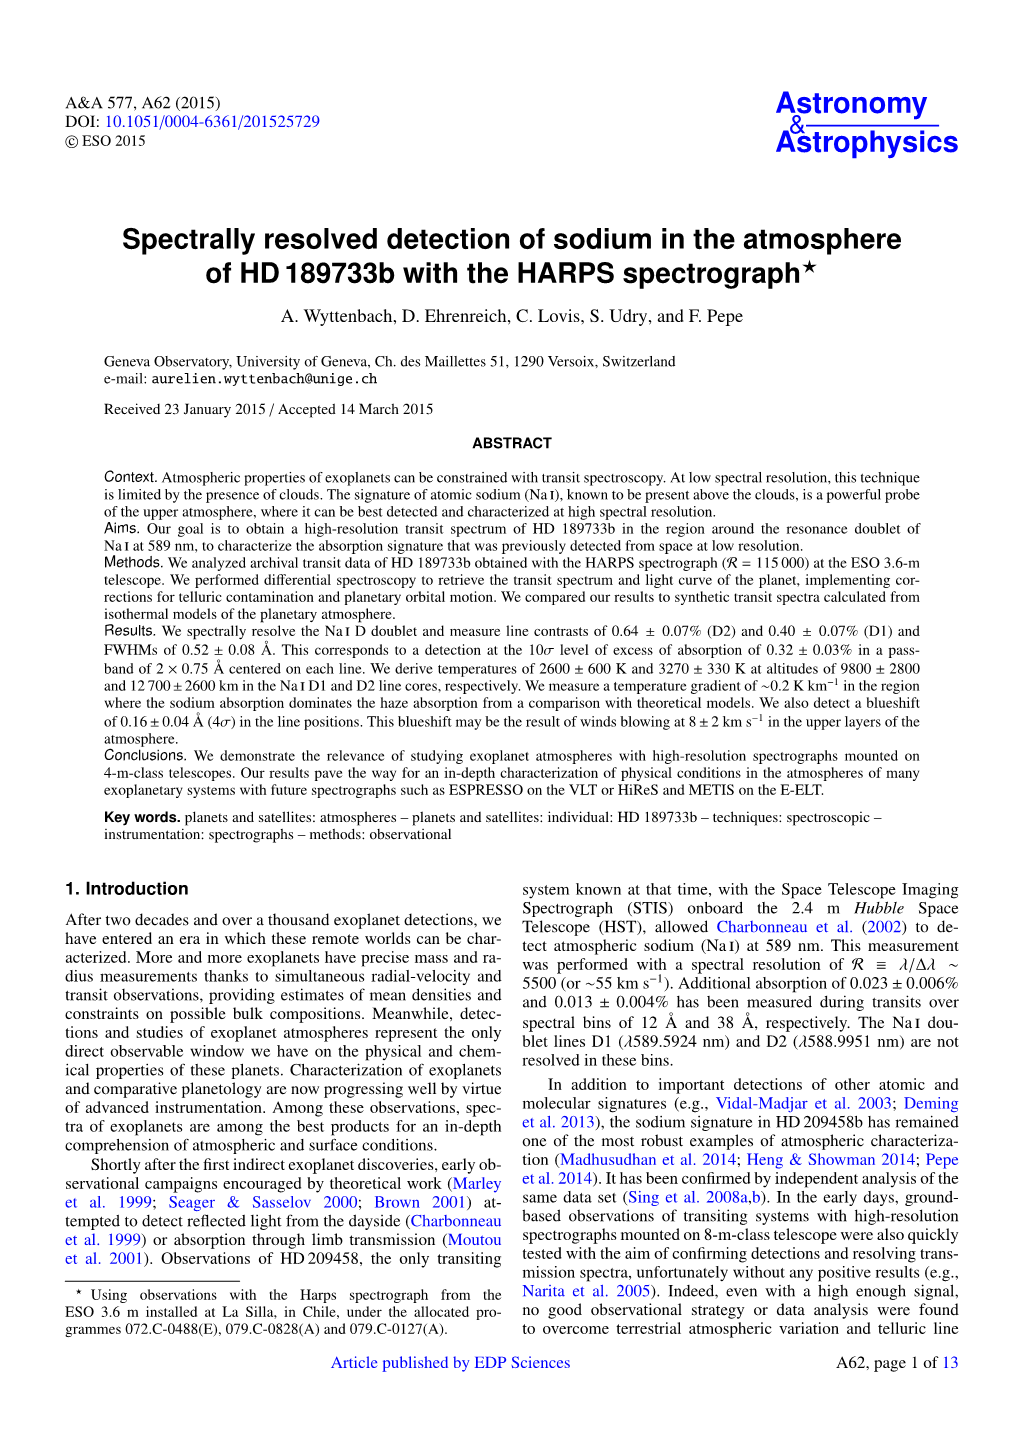 Spectrally Resolved Detection of Sodium in the Atmosphere of HD 189733B with the HARPS Spectrograph? A